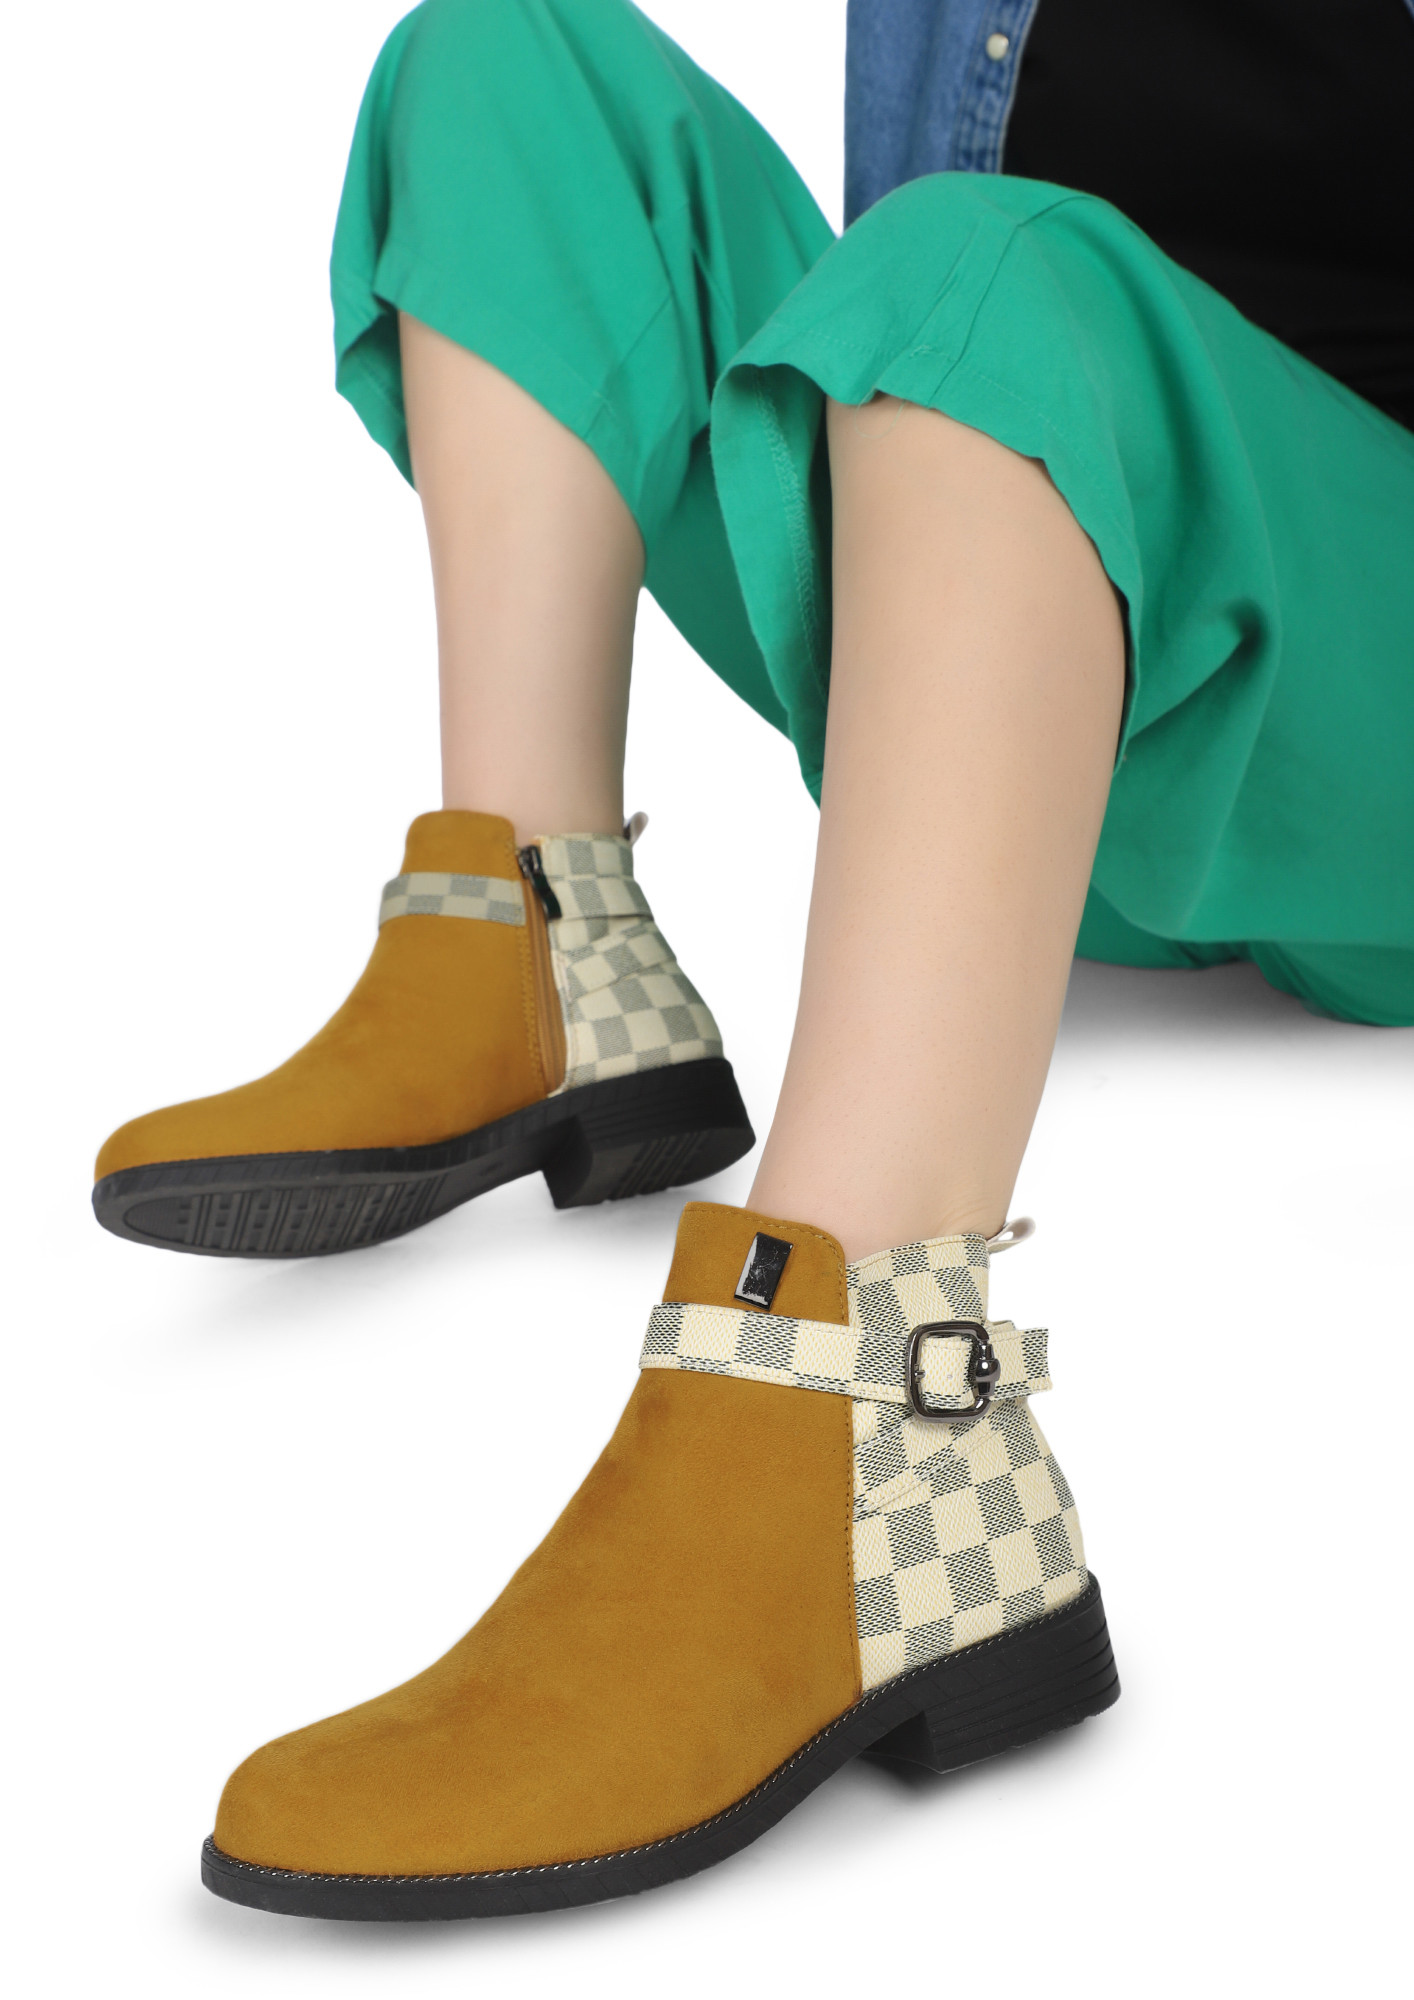 FOR THE THRILL OF IT YELLOW ANKLE BOOTS